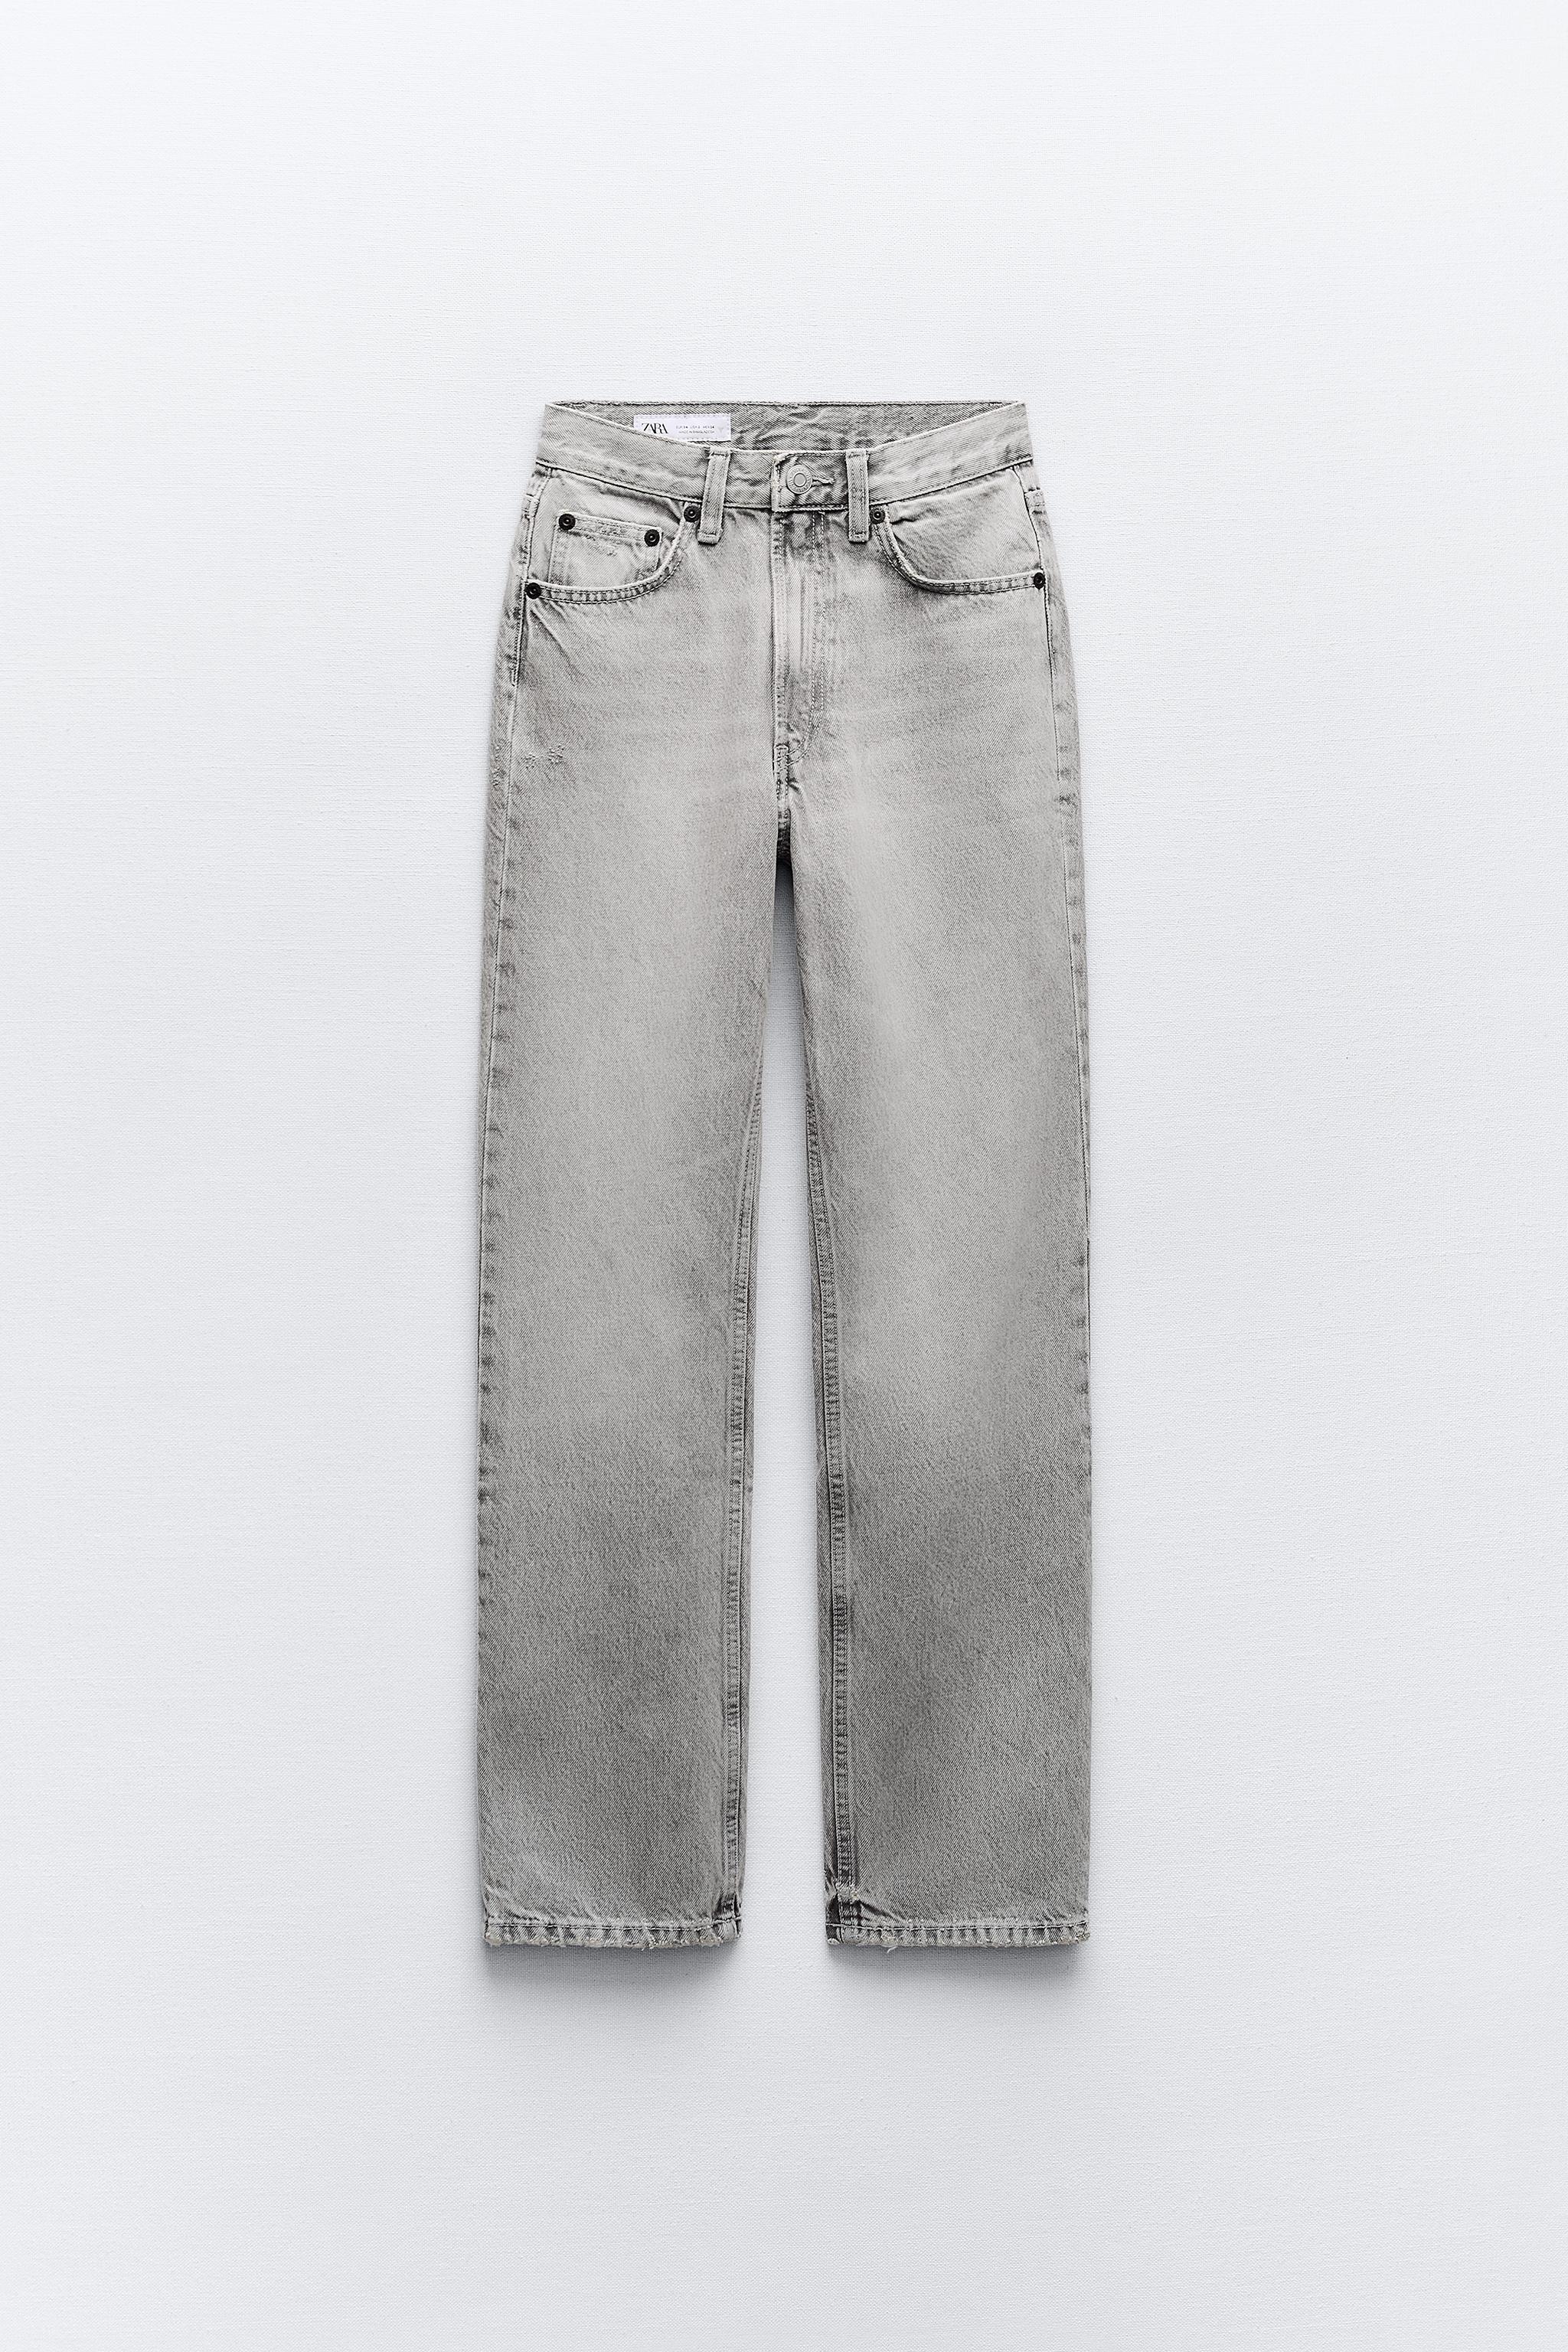 ZARA HIGH RISE ANKLE LENGHT MOM JEANS – ZAGAL